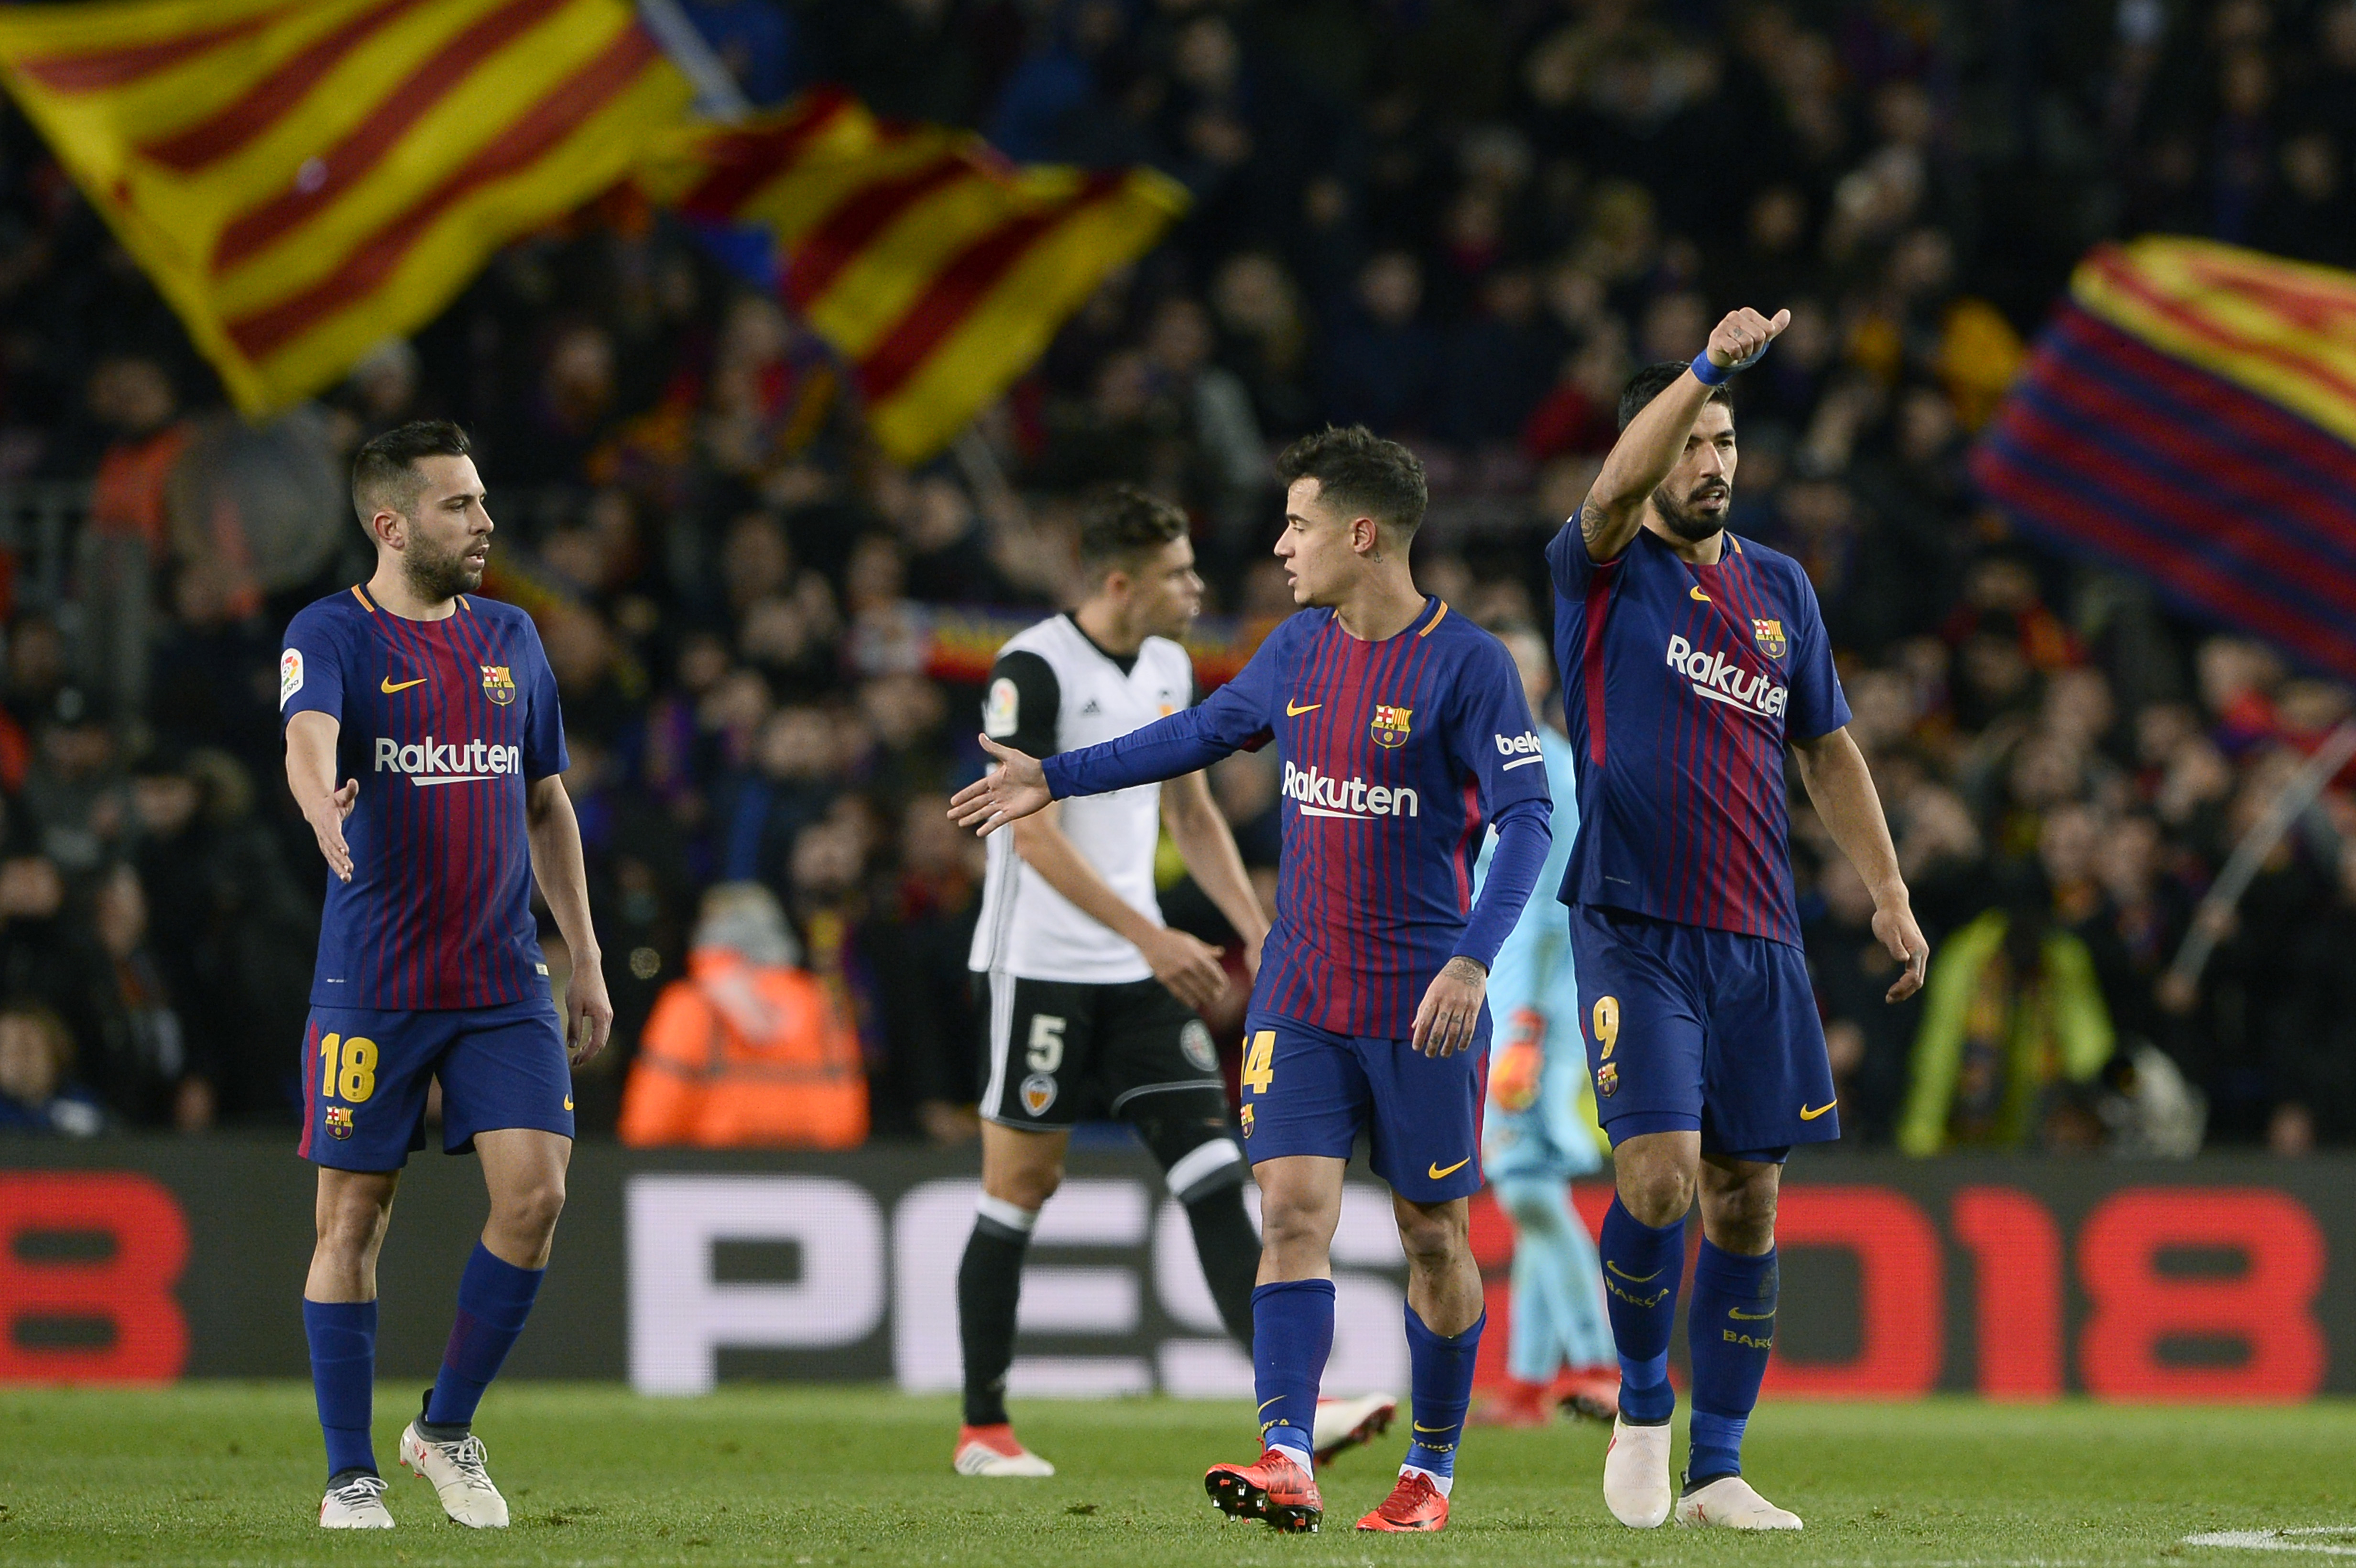 Barcelona's Uruguayan forward Luis Suarez (R) celebrates with Barcelona's Brazilian midfielder Philippe Coutinho (C) and Barcelona's Spanish defender Jordi Alba after scoring during the Spanish 'Copa del Rey' (King's cup) first leg semi-final football match between FC Barcelona and Valencia CF at the Camp Nou stadium in Barcelona on February 01, 2018. / AFP PHOTO / Josep LAGO        (Photo credit should read JOSEP LAGO/AFP/Getty Images)